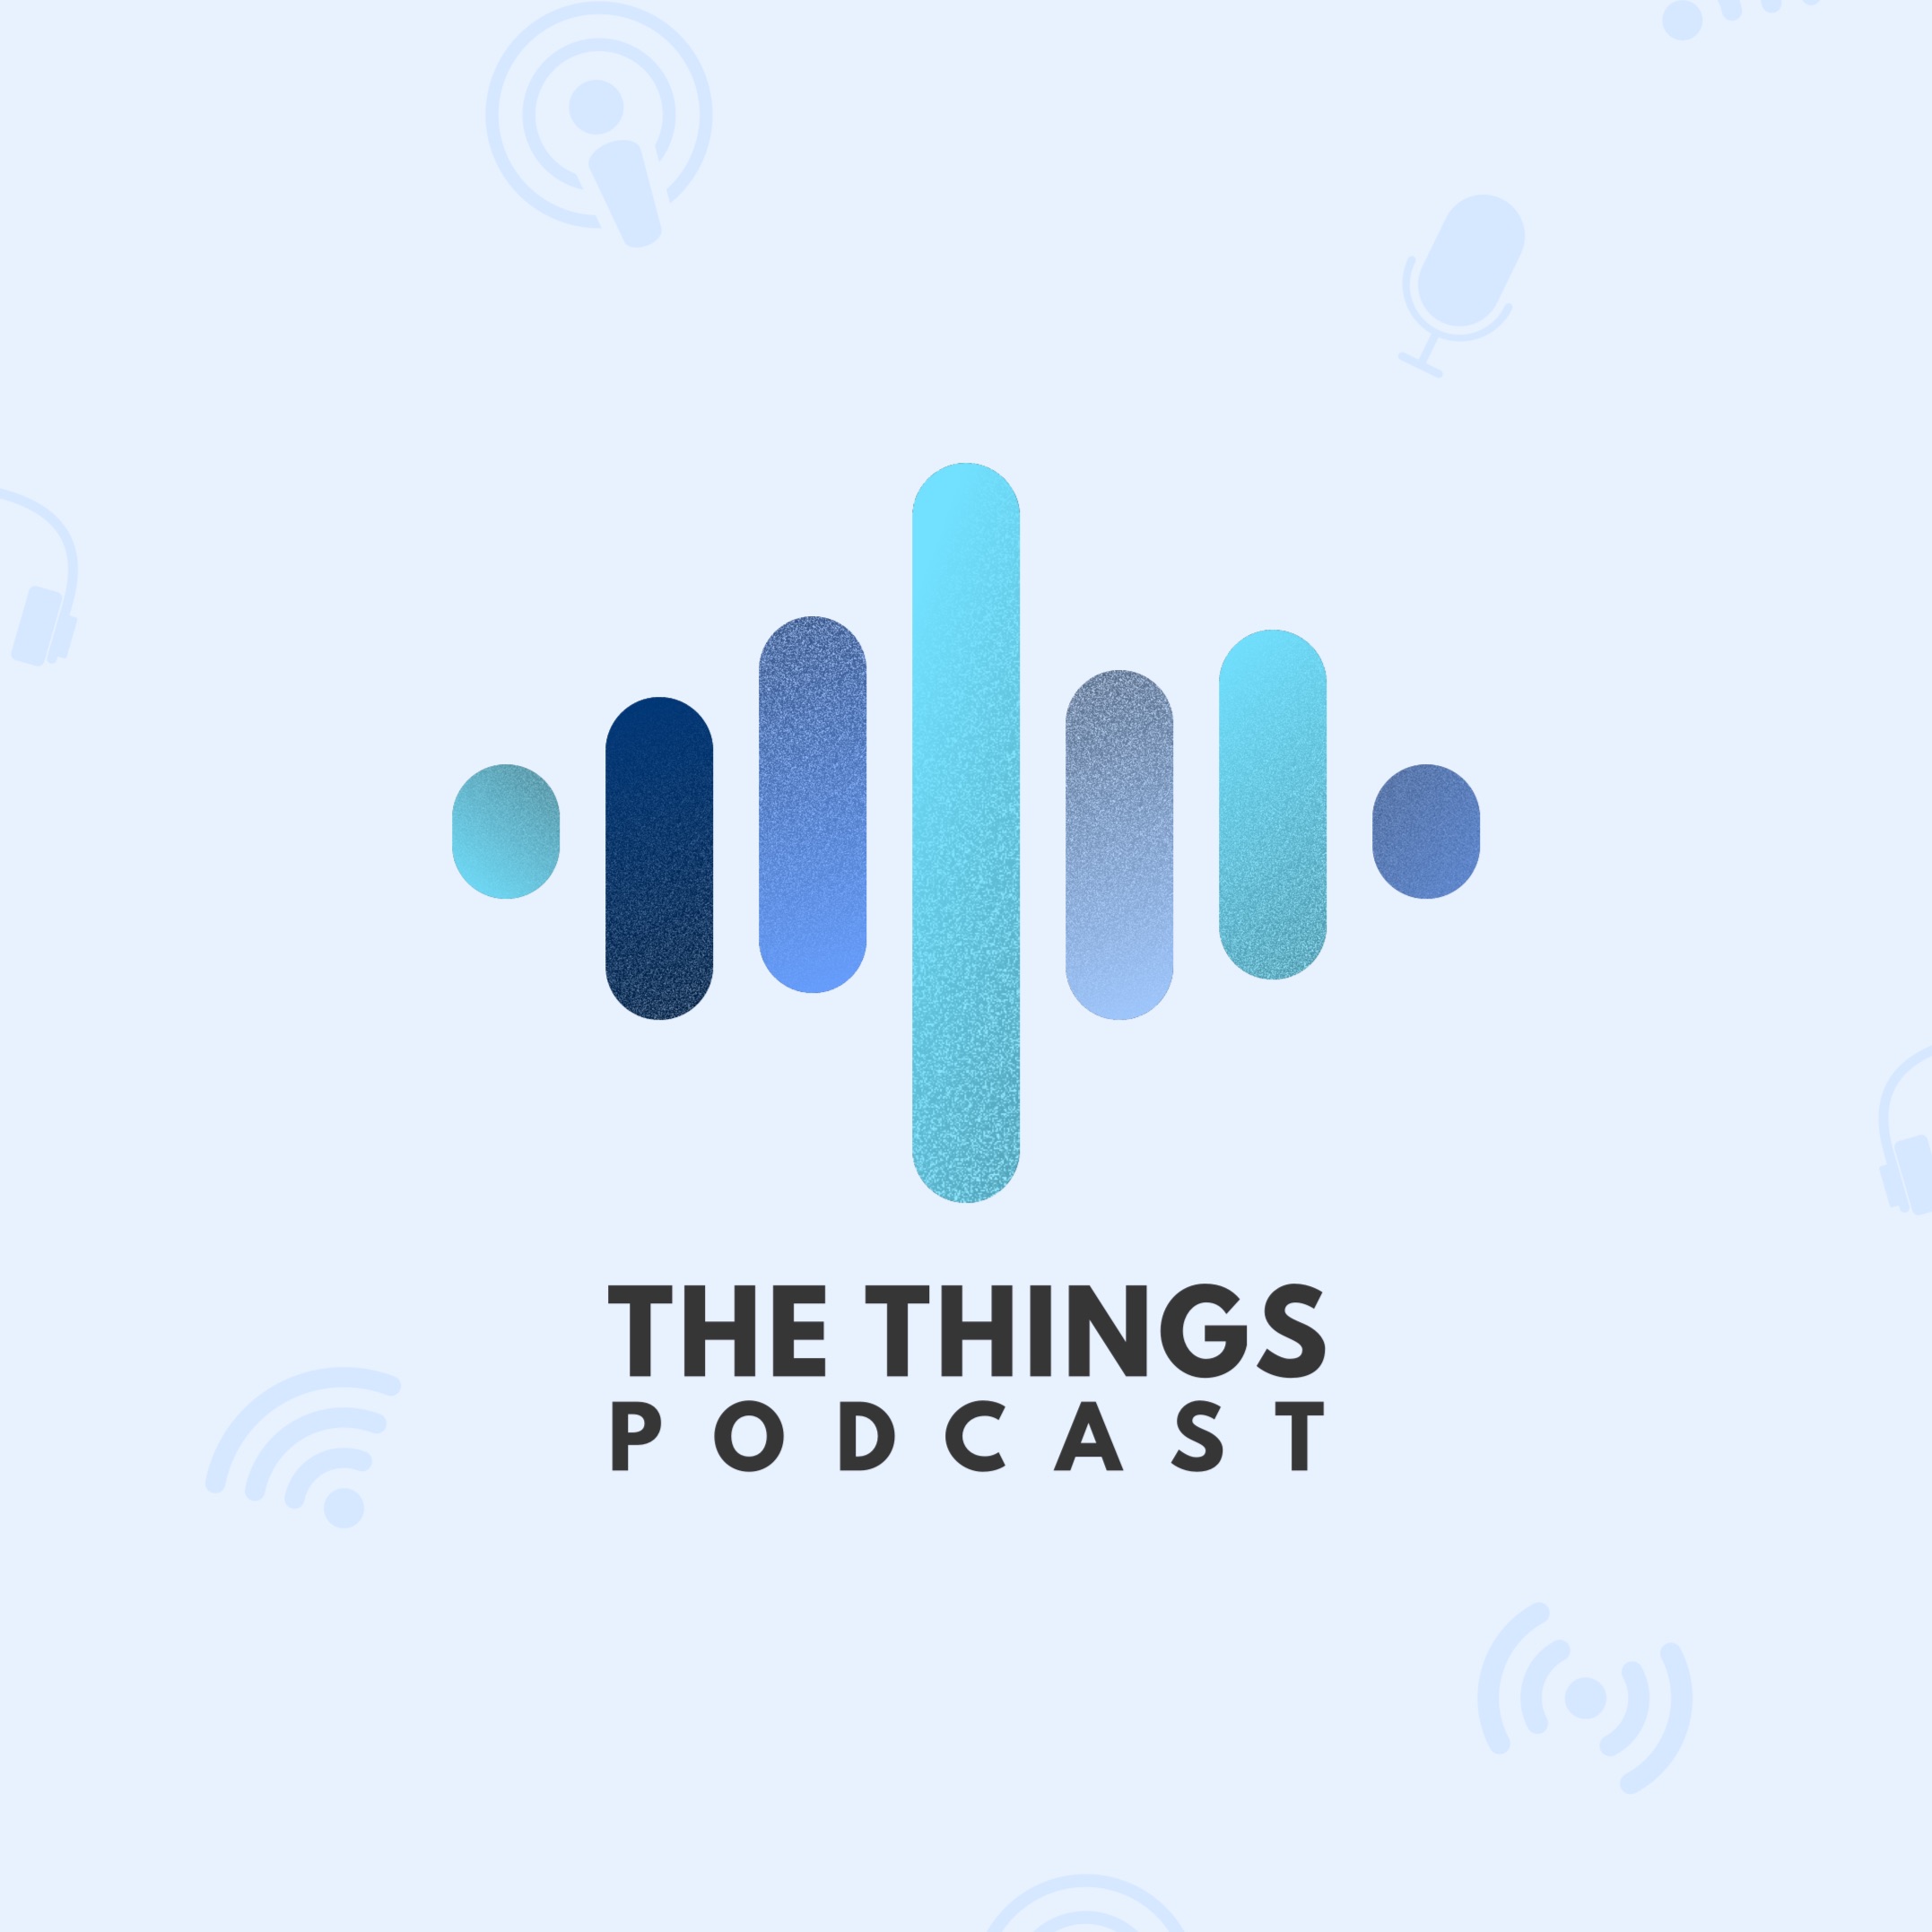 The Things Podcast